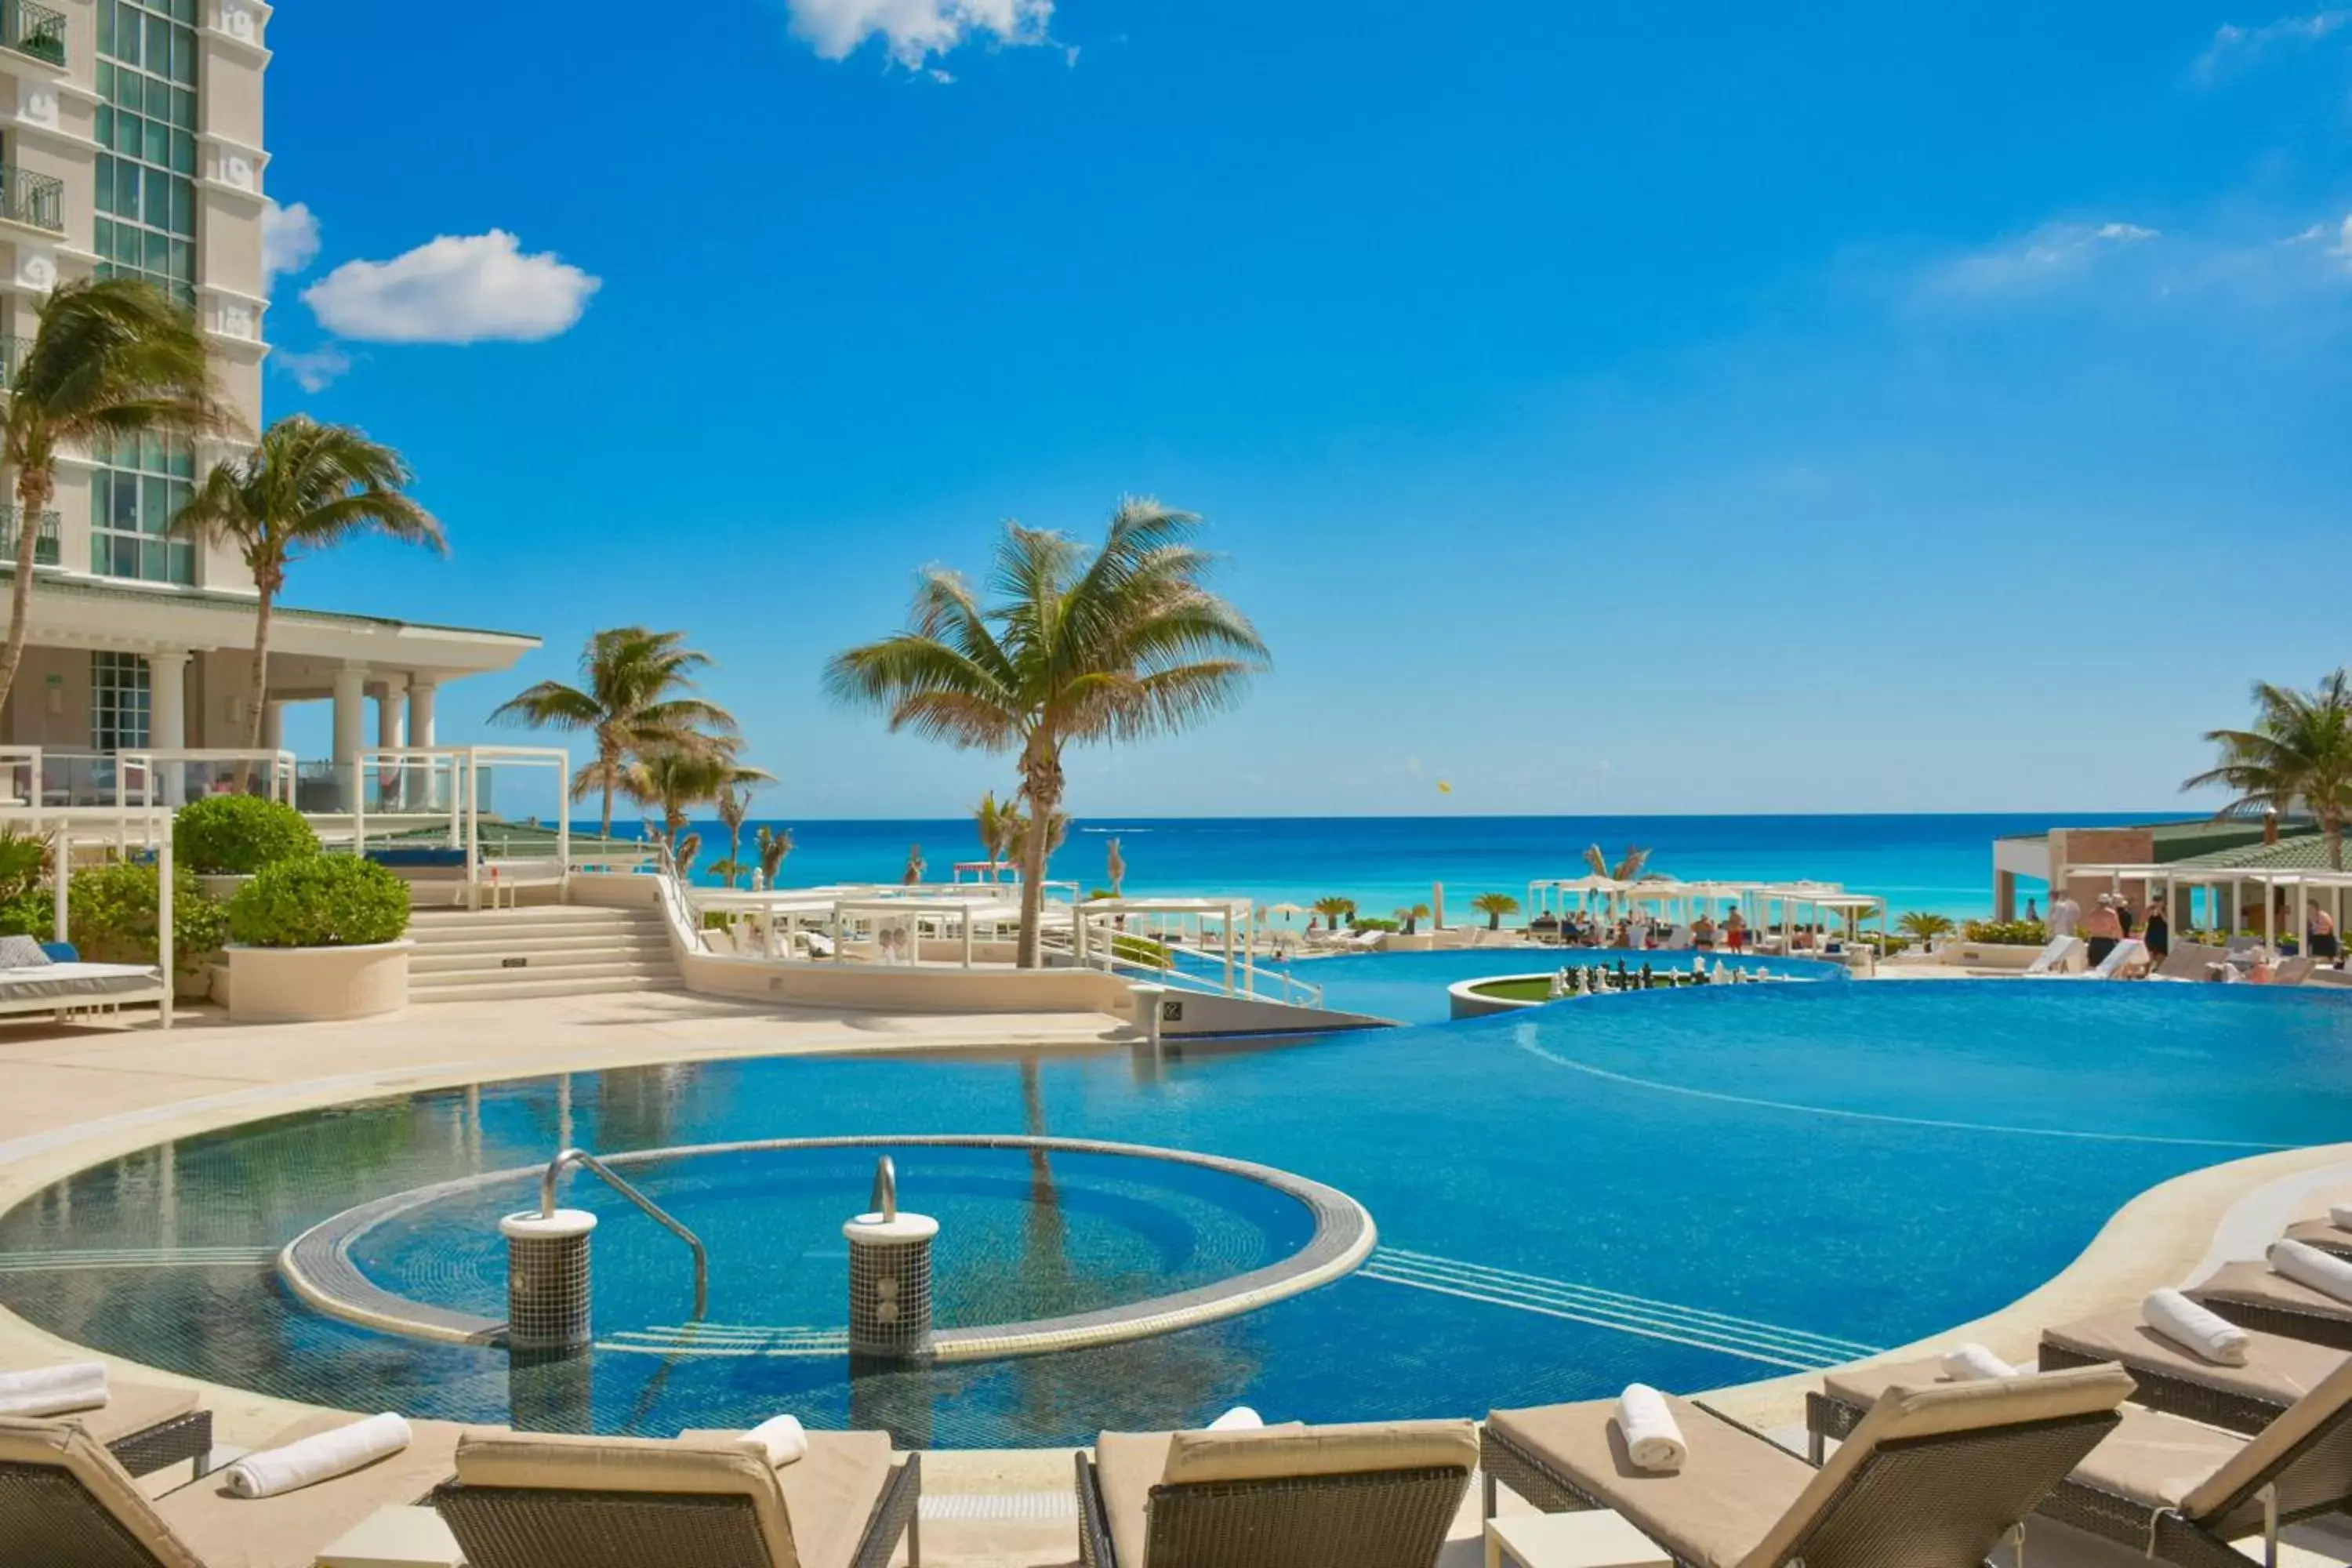 Day, Swimming Pool in Sandos Cancun All Inclusive